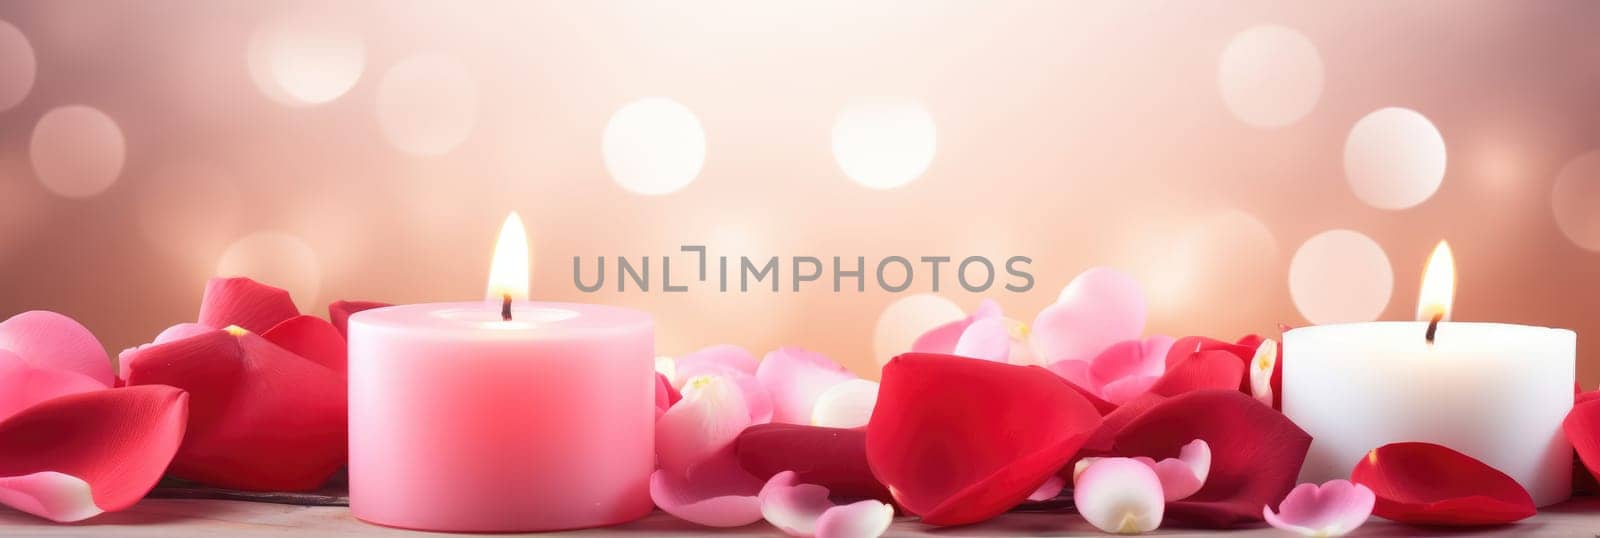 St. Valentines day, wedding banner with abstract illustrated red, pink rose petals, candles on pink background. Use for cute love sale banner, print, greeting card. Concept love, copy space. by Angelsmoon